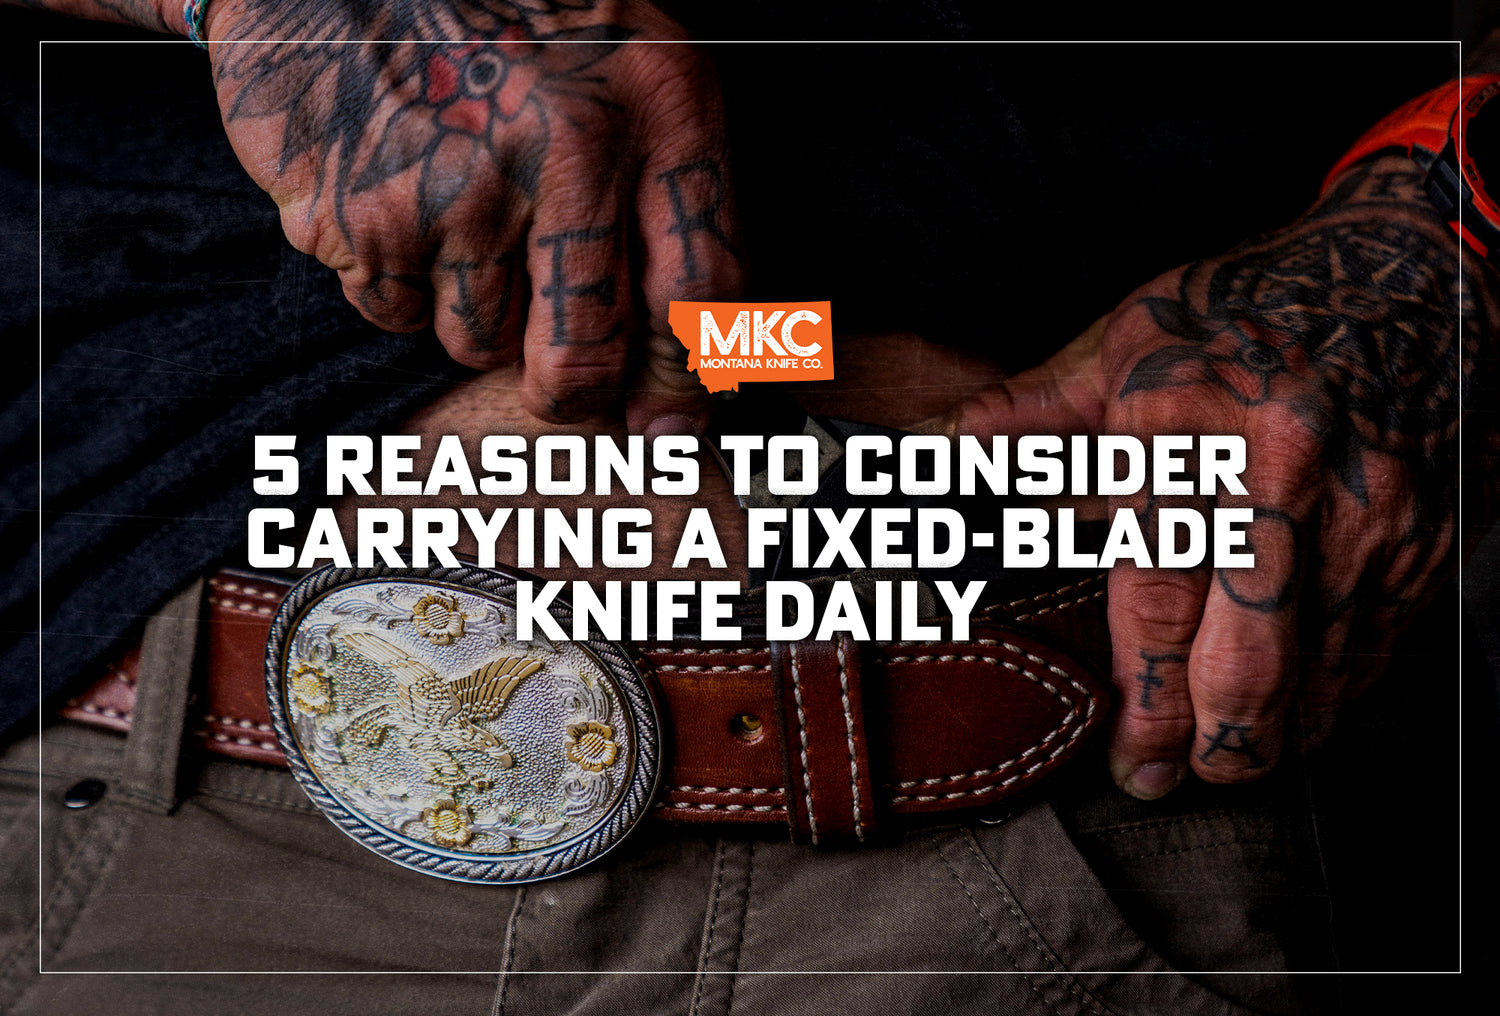 Tattooed hands place a fixed-blade knife in its sheath, at their belted waistband. 